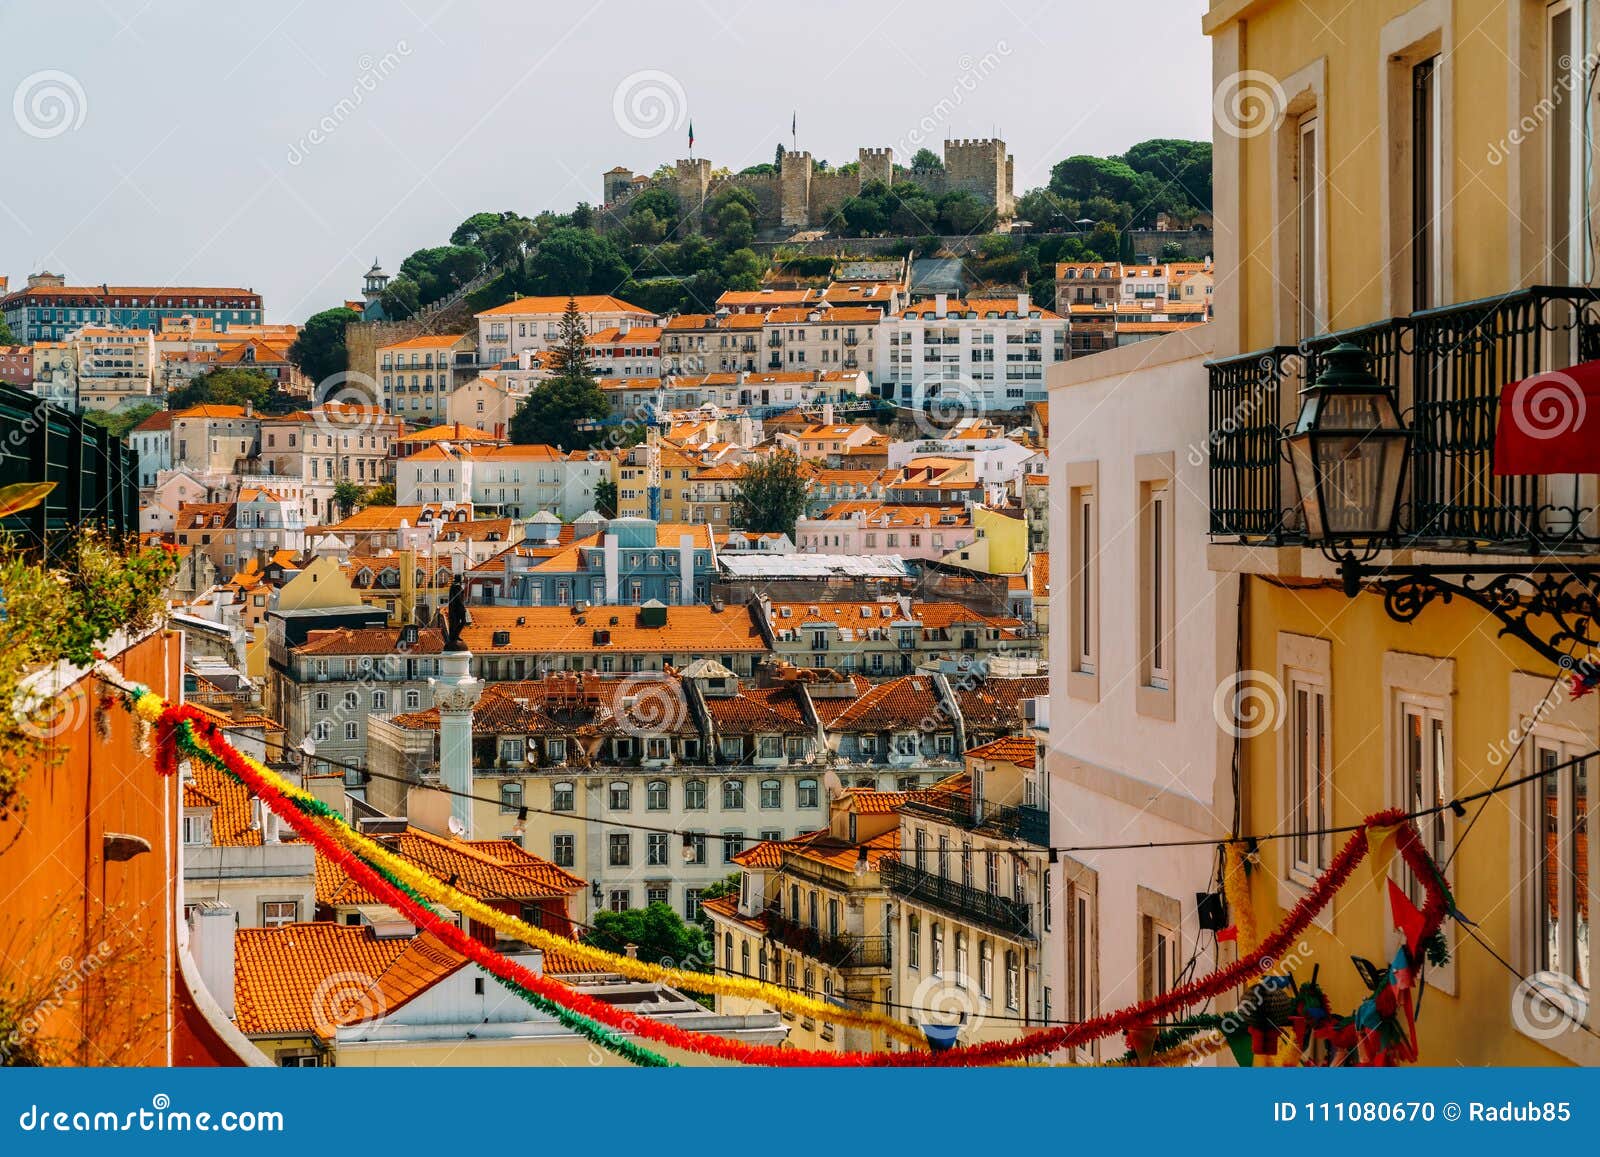 panoramic view of sao jorge castle in lisbon